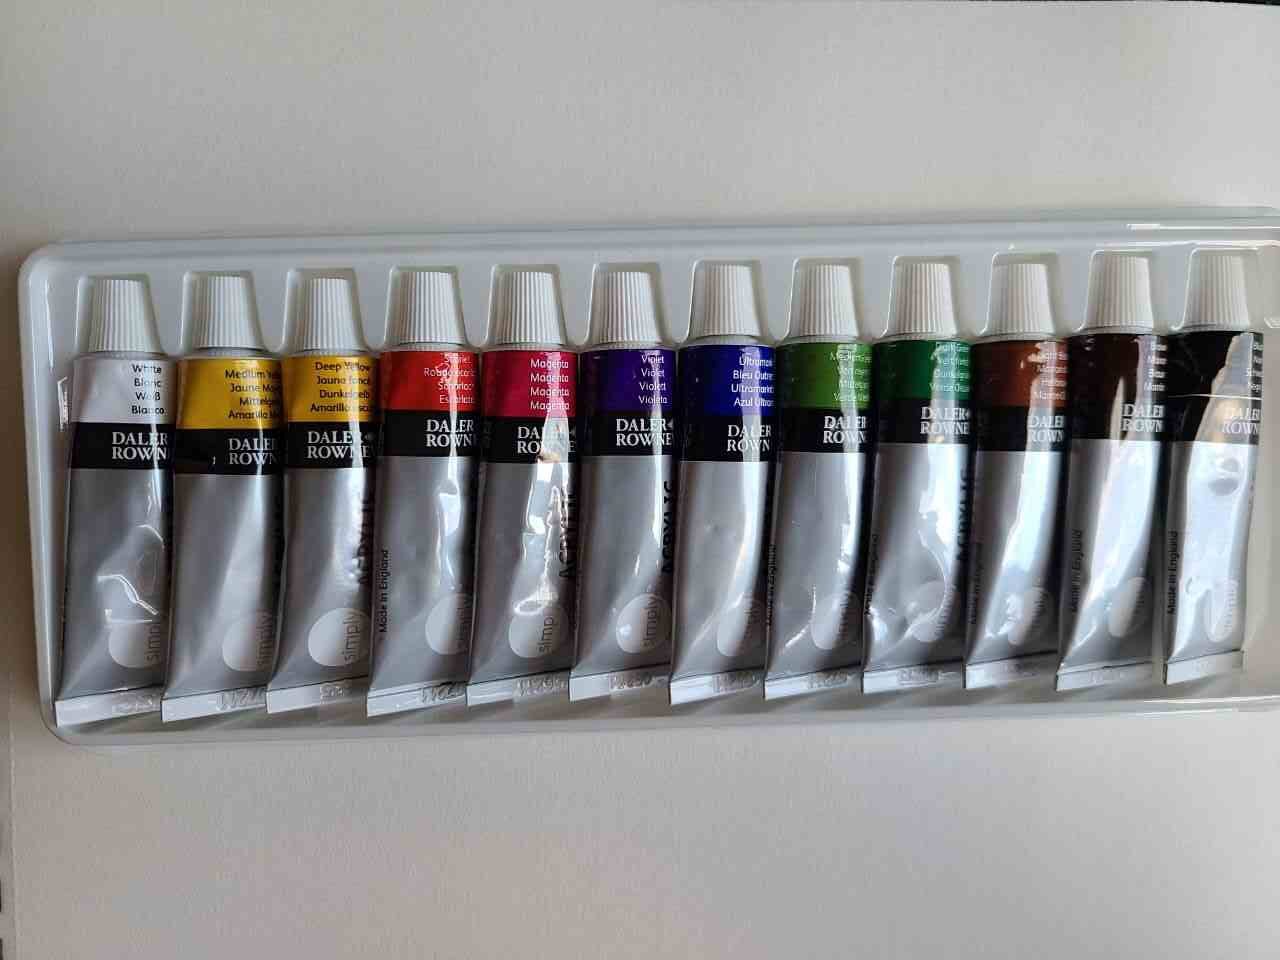 daler rowney acrylic paint review simply set